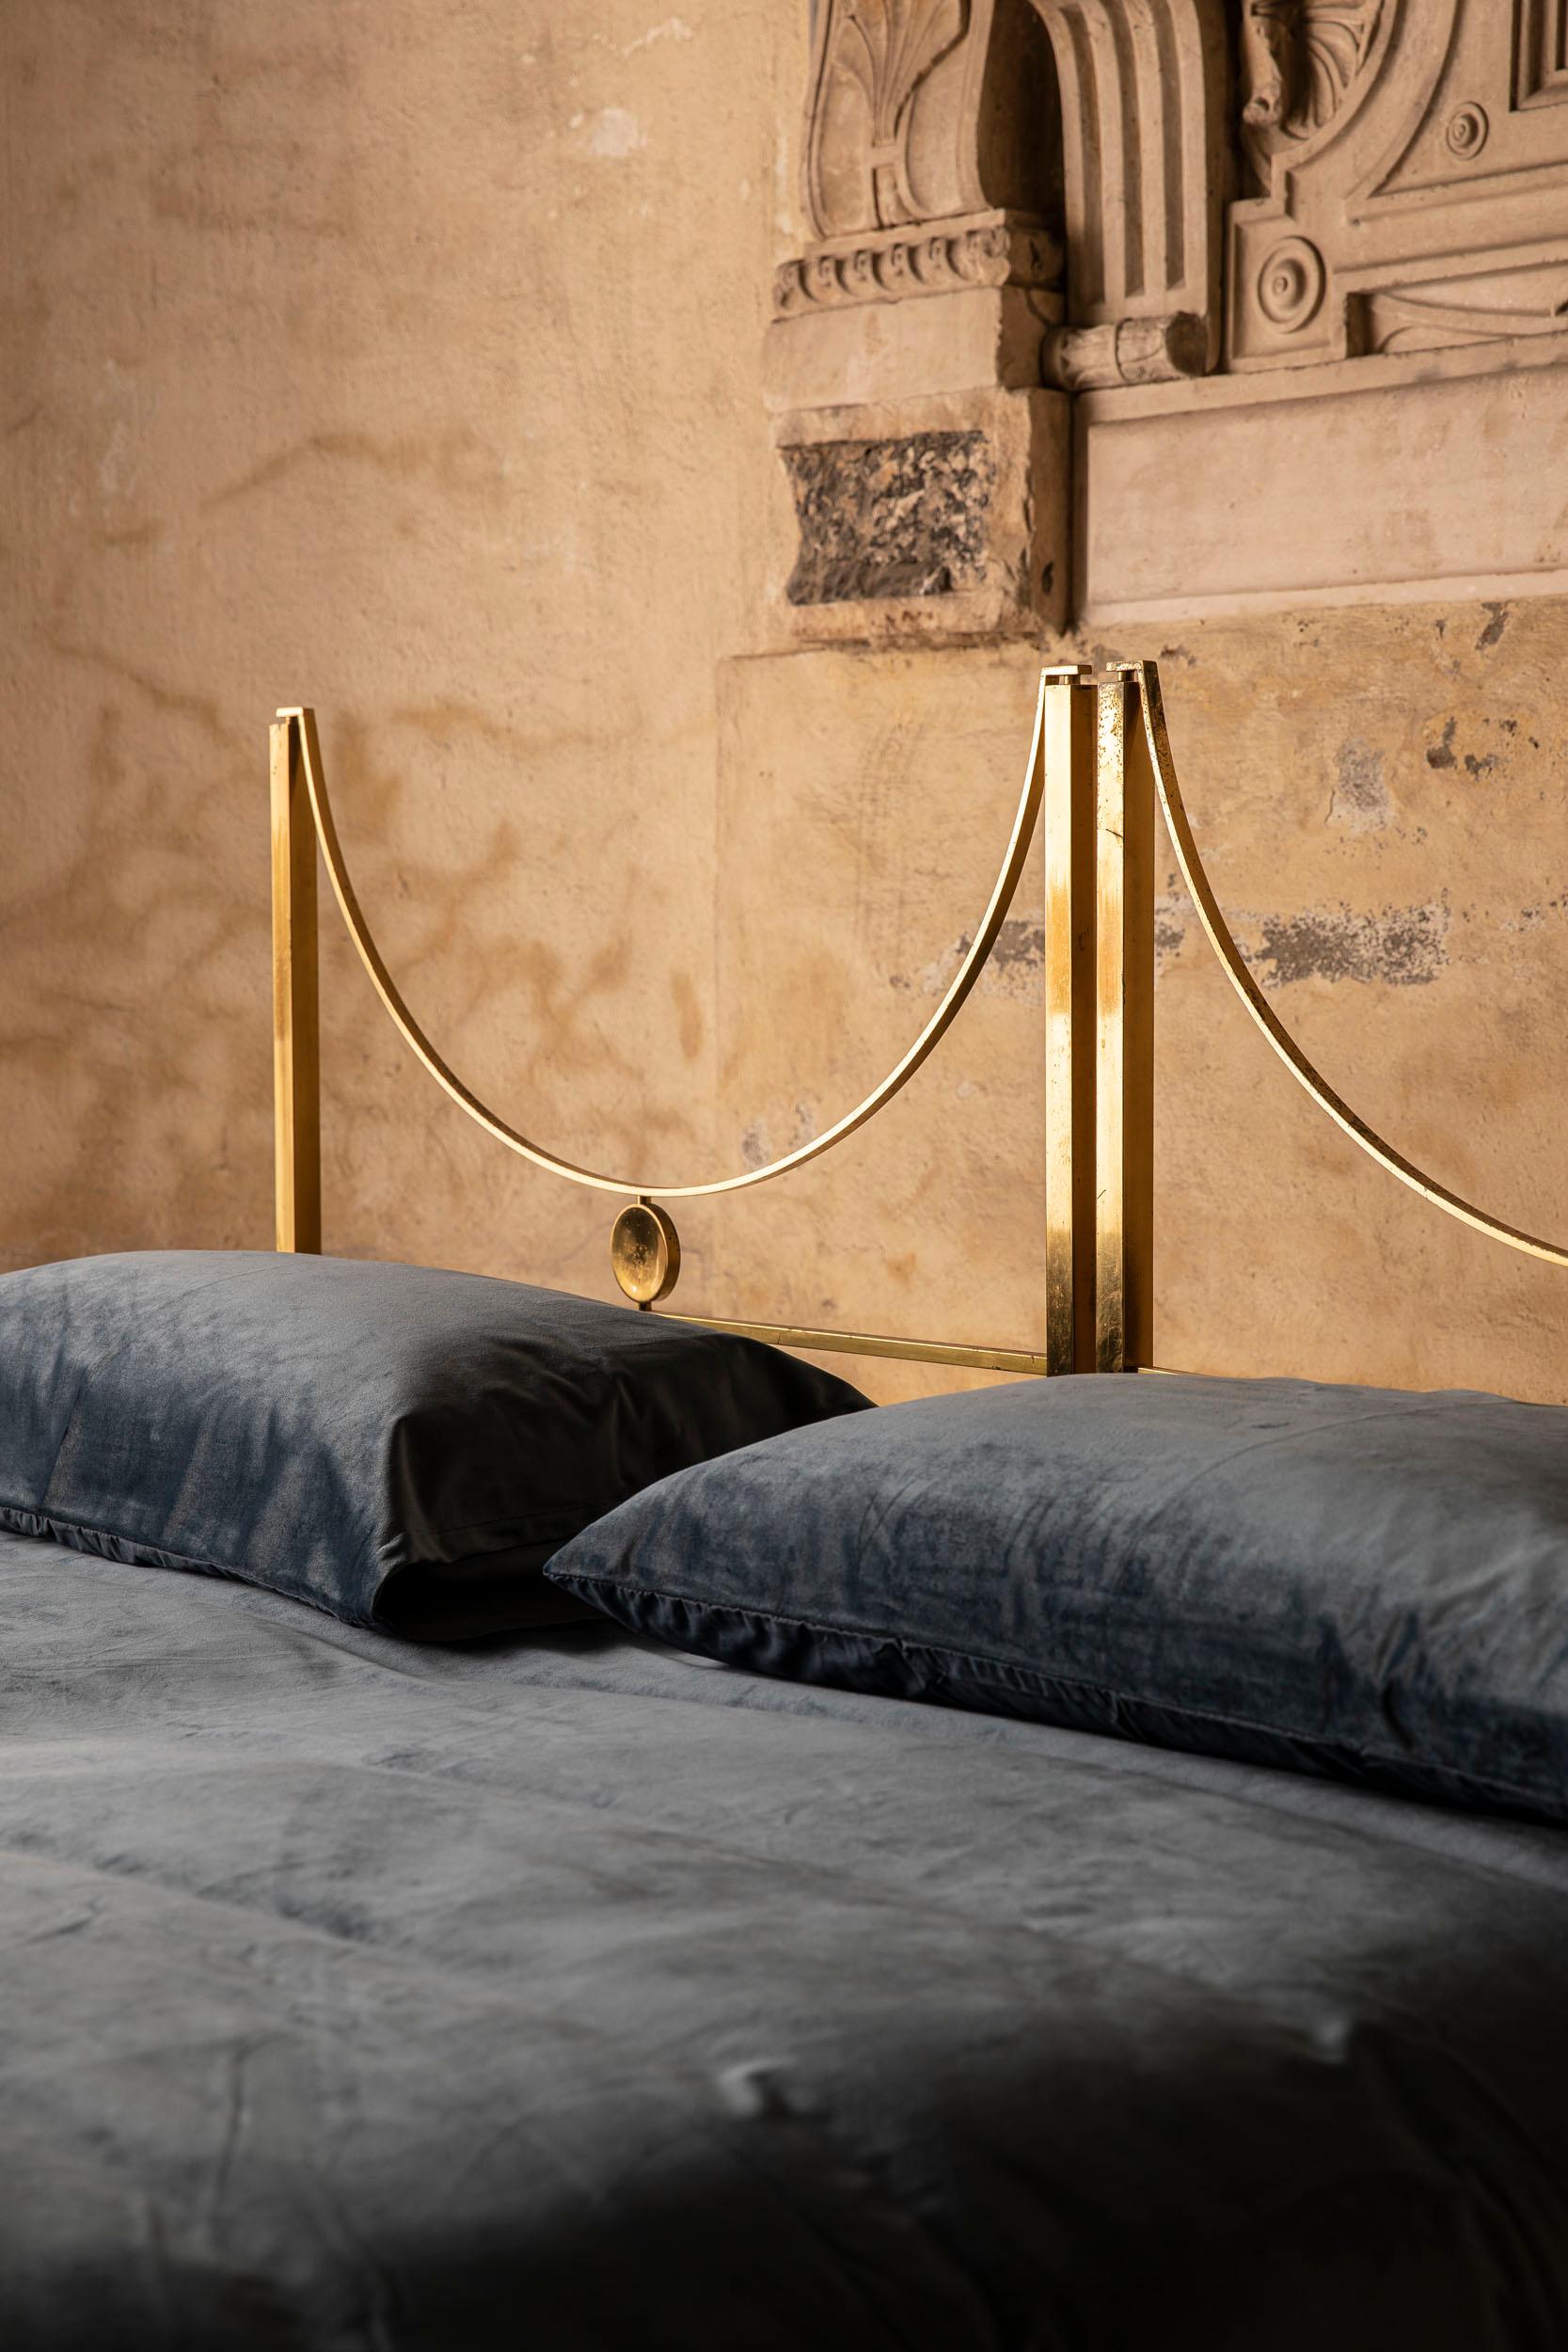 Charming pair of wood and brass beds designed by Carlo de Carli for Sormani model D90.
The beds are two, they can be used as single bed or king size.